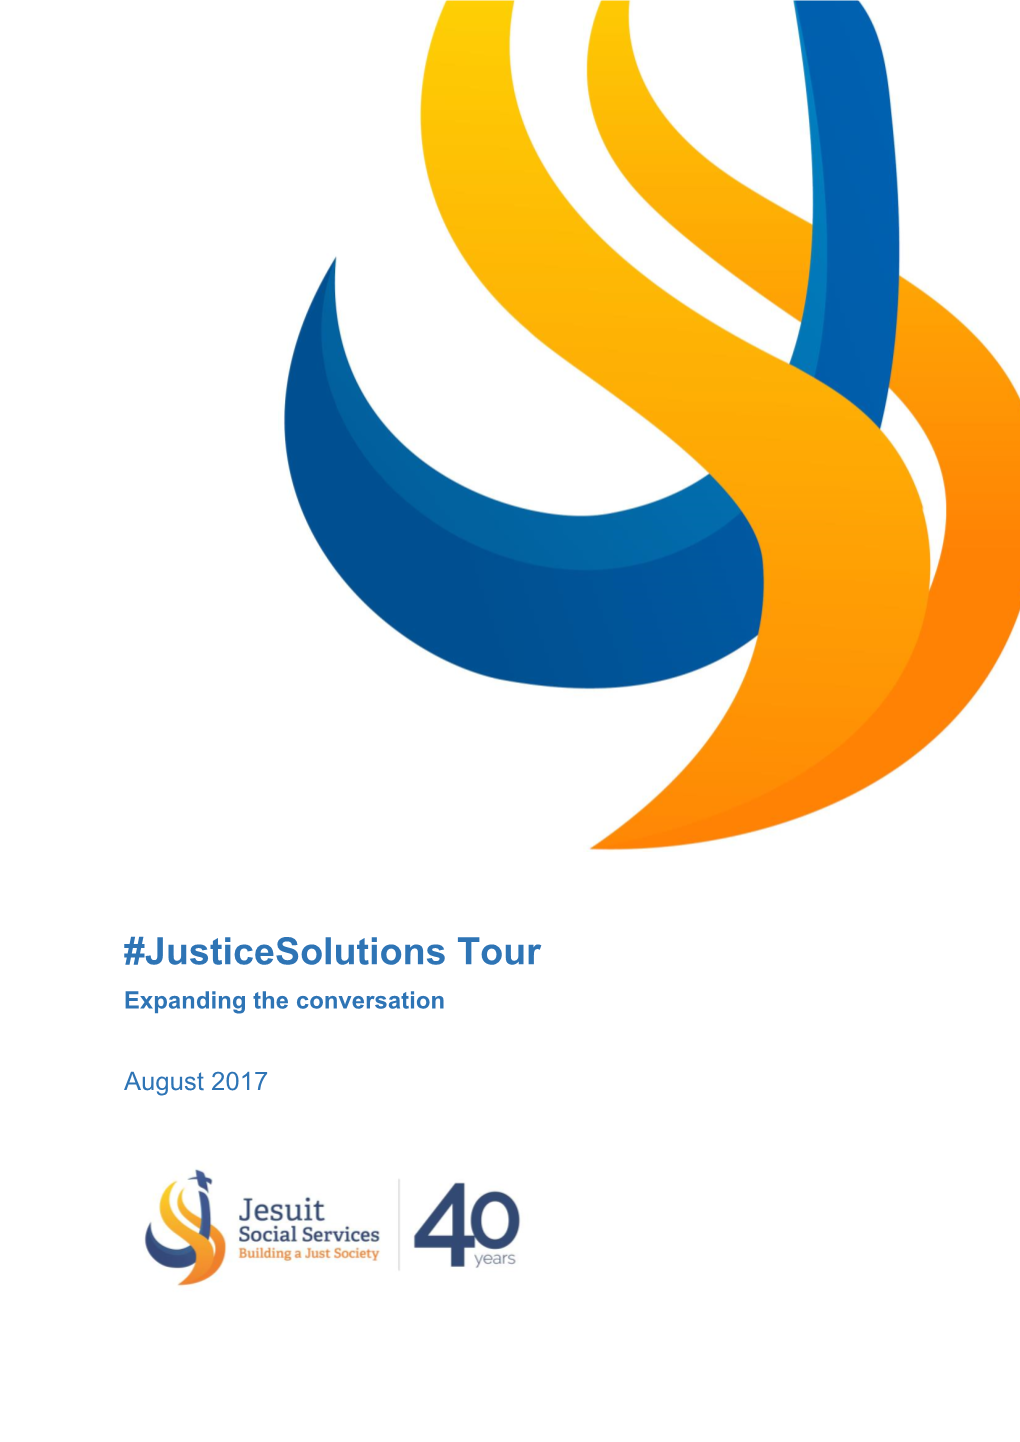 Justicesolutions Tour Expanding the Conversation